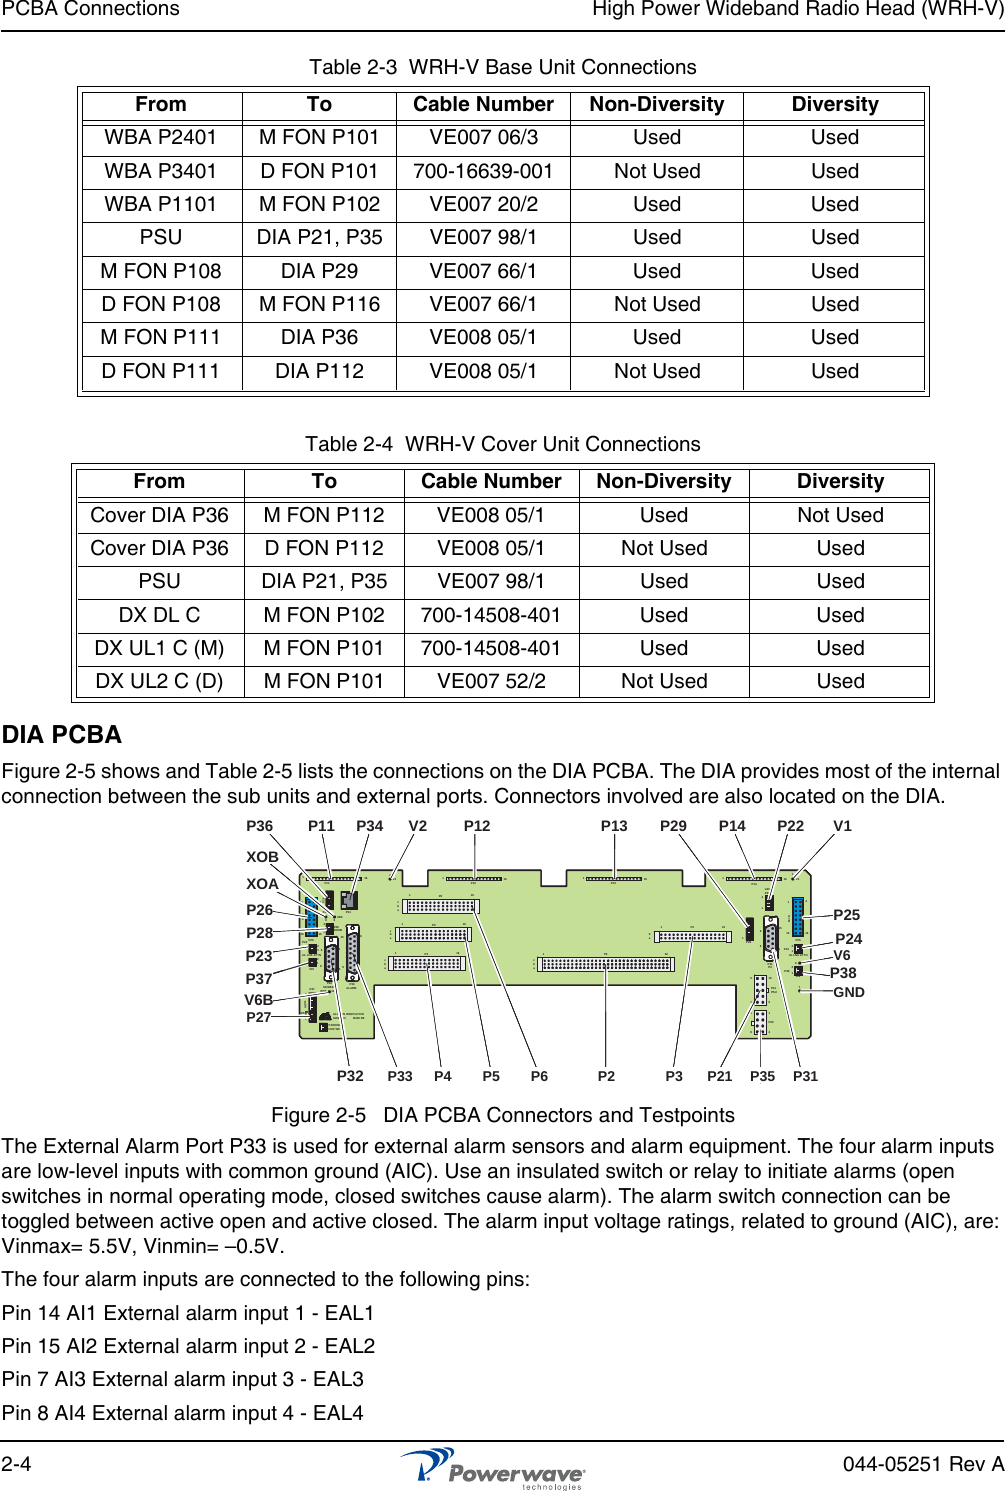 PCBA Connections High Power Wideband Radio Head (WRH-V)2-4 044-05251 Rev ATable 2-3  WRH-V Base Unit ConnectionsTable 2-4  WRH-V Cover Unit ConnectionsDIA PCBAFigure 2-5 shows and Table 2-5 lists the connections on the DIA PCBA. The DIA provides most of the internal connection between the sub units and external ports. Connectors involved are also located on the DIA. Figure 2-5   DIA PCBA Connectors and TestpointsThe External Alarm Port P33 is used for external alarm sensors and alarm equipment. The four alarm inputs are low-level inputs with common ground (AIC). Use an insulated switch or relay to initiate alarms (open switches in normal operating mode, closed switches cause alarm). The alarm switch connection can be toggled between active open and active closed. The alarm input voltage ratings, related to ground (AIC), are: Vinmax= 5.5V, Vinmin= –0.5V.The four alarm inputs are connected to the following pins:Pin 14 AI1 External alarm input 1 - EAL1Pin 15 AI2 External alarm input 2 - EAL2Pin 7 AI3 External alarm input 3 - EAL3Pin 8 AI4 External alarm input 4 - EAL4From To Cable Number Non-Diversity DiversityWBA P2401 M FON P101 VE007 06/3 Used UsedWBA P3401 D FON P101 700-16639-001 Not Used UsedWBA P1101 M FON P102 VE007 20/2 Used UsedPSU DIA P21, P35 VE007 98/1 Used UsedM FON P108 DIA P29 VE007 66/1 Used UsedD FON P108 M FON P116 VE007 66/1 Not Used UsedM FON P111 DIA P36 VE008 05/1 Used UsedD FON P111 DIA P112 VE008 05/1 Not Used UsedFrom To Cable Number Non-Diversity DiversityCover DIA P36 M FON P112 VE008 05/1 Used Not UsedCover DIA P36 D FON P112 VE008 05/1 Not Used UsedPSU DIA P21, P35 VE007 98/1 Used UsedDX DL C M FON P102 700-14508-401 Used UsedDX UL1 C (M) M FON P101 700-14508-401 Used UsedDX UL2 C (D) M FON P101 VE007 52/2 Not Used UsedALLGON INNOVATIONSWEDEN         M105 R61PARKINGFOR W5W58P27 W6B 101P33ALARMP23UL LNA ATT NP32MODEMAUX1P28DOOR596111611M-&gt;SP11P348915P2615 16S-&gt;M12389P365X0AX0B2V2 116P12 P13111161616P4P5P6cbacbacbacba1P2321ba116P316 116P141V111111461156915216124585P35P21PSU610P31PCP29P24P25GND76V6UL LNA ATTNLEDP2212V6BP26XOAXOBP28P4 P5 P6 P2 P3 P31 P21  P35 P33P32P11 P12 P13 V1P14 P22P29P34 V2P36V6GNDP25P24P27P2312P37DIV 12P38DIVP38ALLGON INNOVATIONSWEDEN         M105 R61PARKINGFOR W5W58P27 W6B 101P33ALARMP23UL LNA ATT NP32MODEMAUX1P28DOOR596111611M-&gt;SP11P348915P2615 16S-&gt;M12389P365X0AX0B2V2 116P12 P13111161616P4P5P6cbacbacbacba1P2321ba116P316 116P141V111111461156915216124585P35P21PSU610P31PCP29P24P25GND76V6UL LNA ATTNLEDP2212V6BP26XOAXOBP28P4 P5 P6 P2 P3 P31 P21  P35 P33P32P11 P12 P13 V1P14 P22P29P34 V2P36V6GNDP25P24P27P2312P37DIV 12P38DIVP38